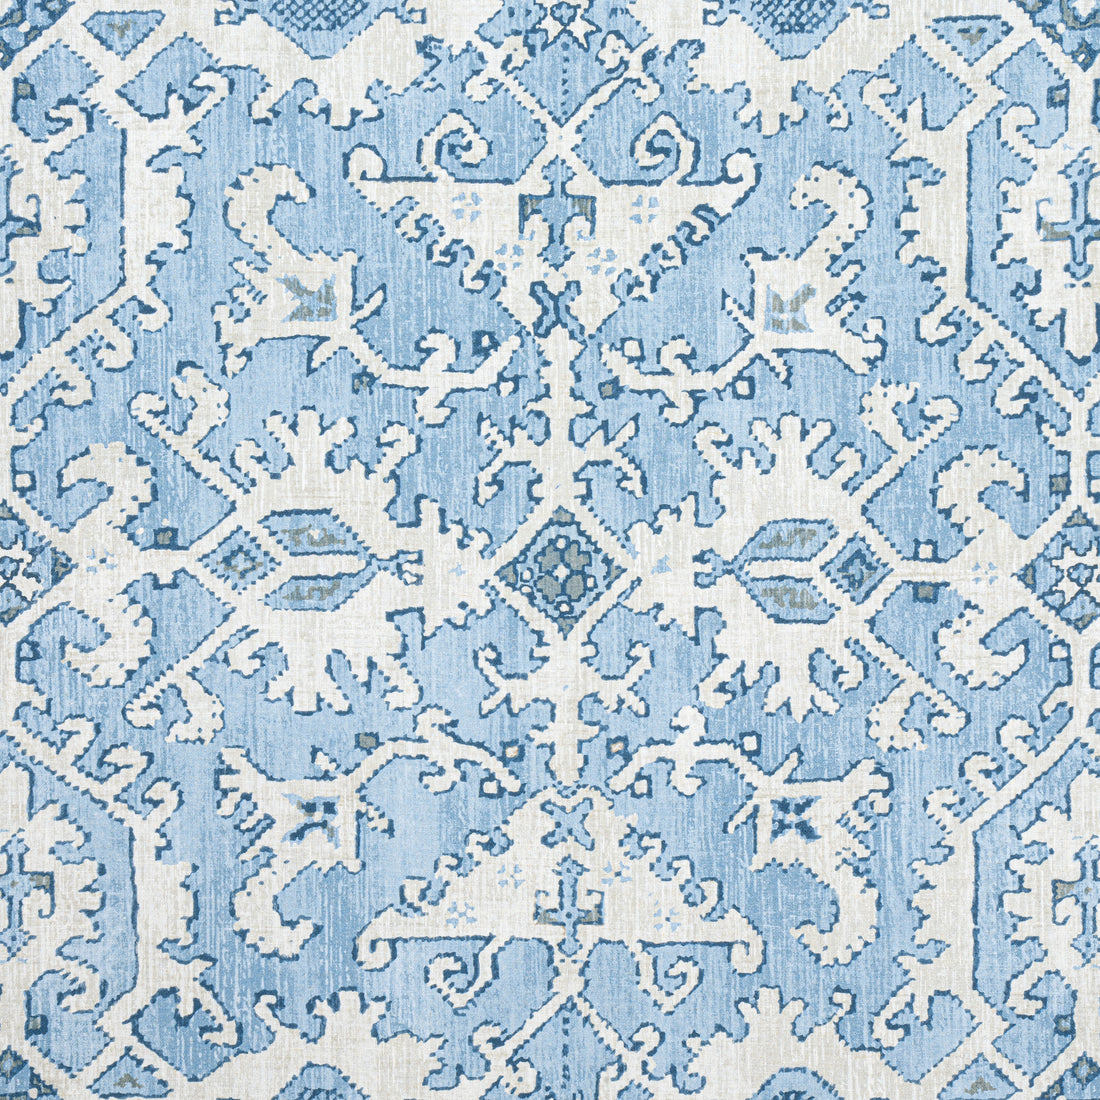 Pontorma fabric in Sky color - pattern number AF24554 - by Anna French in the Devon collection